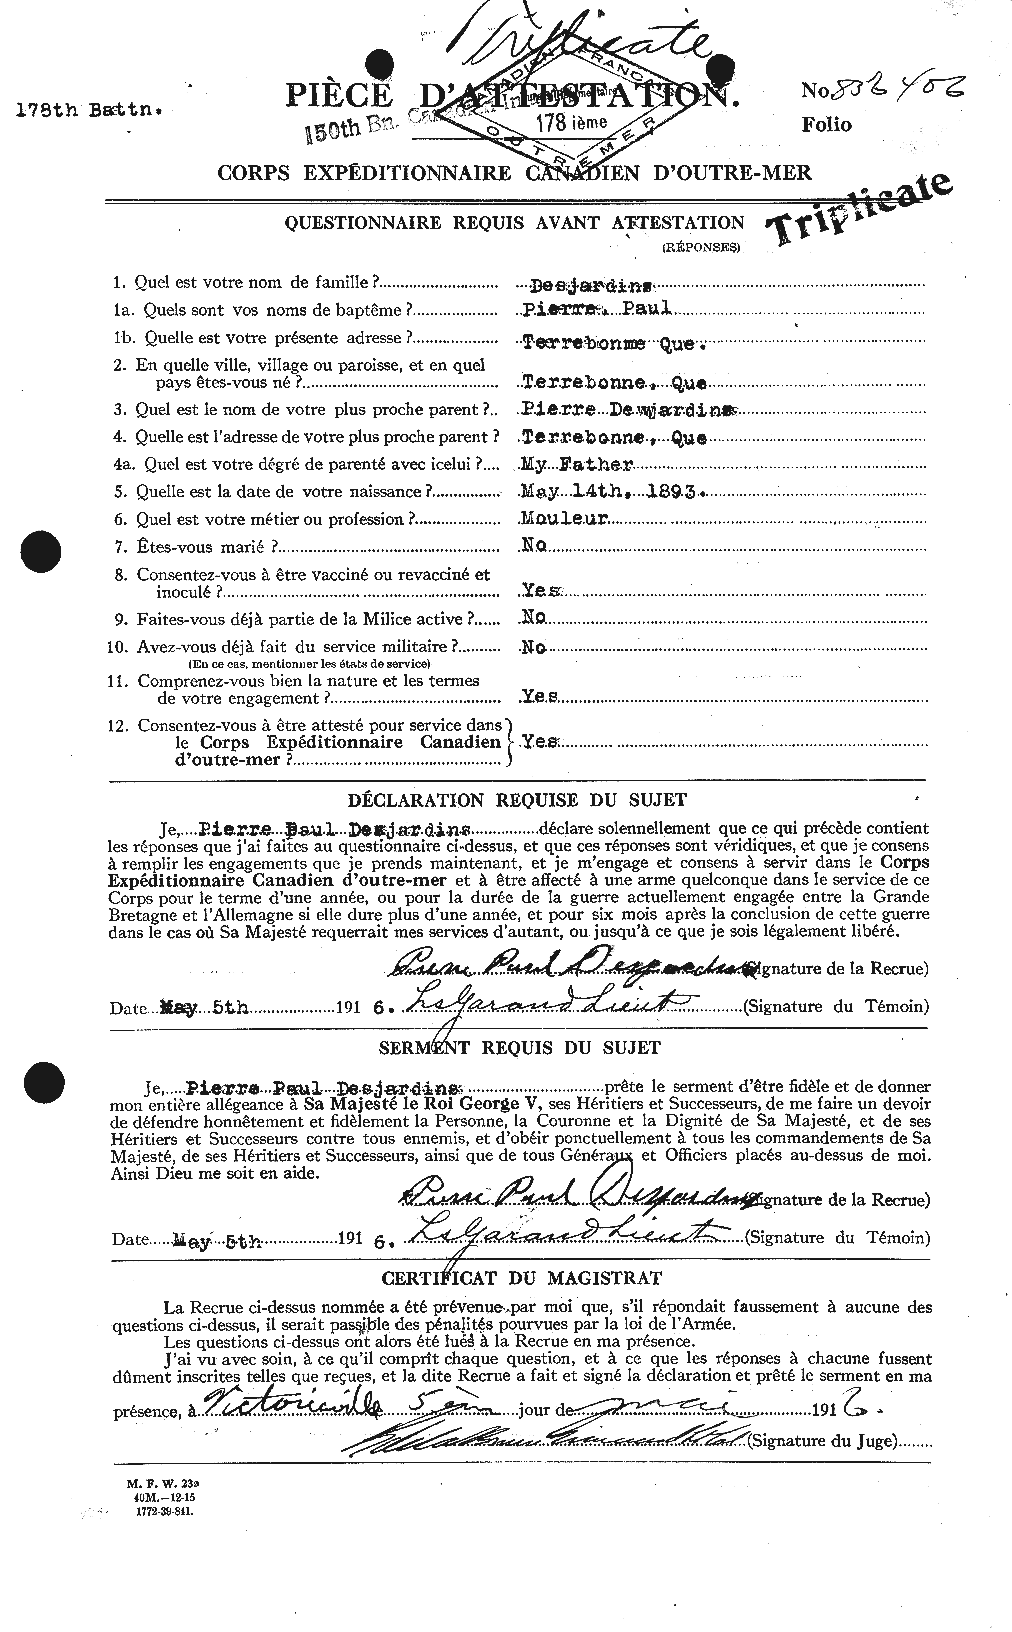 Personnel Records of the First World War - CEF 290001a